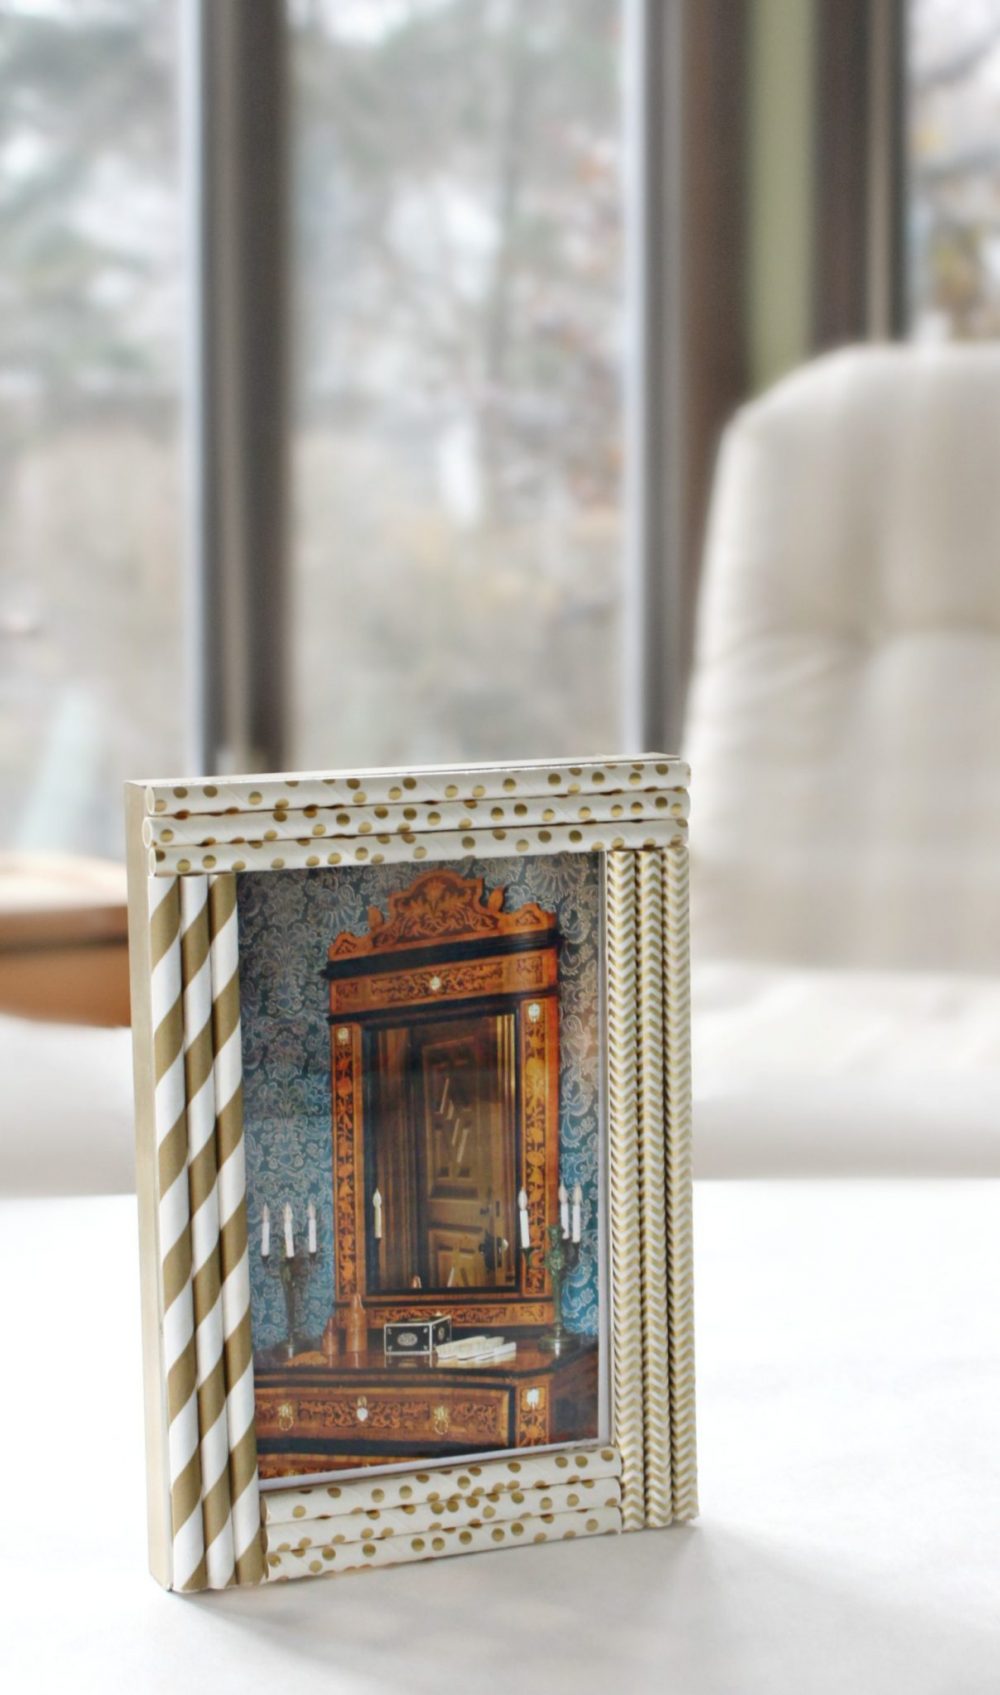 Learn how to decorate and personalize your own photo frame with this super easy straw frame craft!